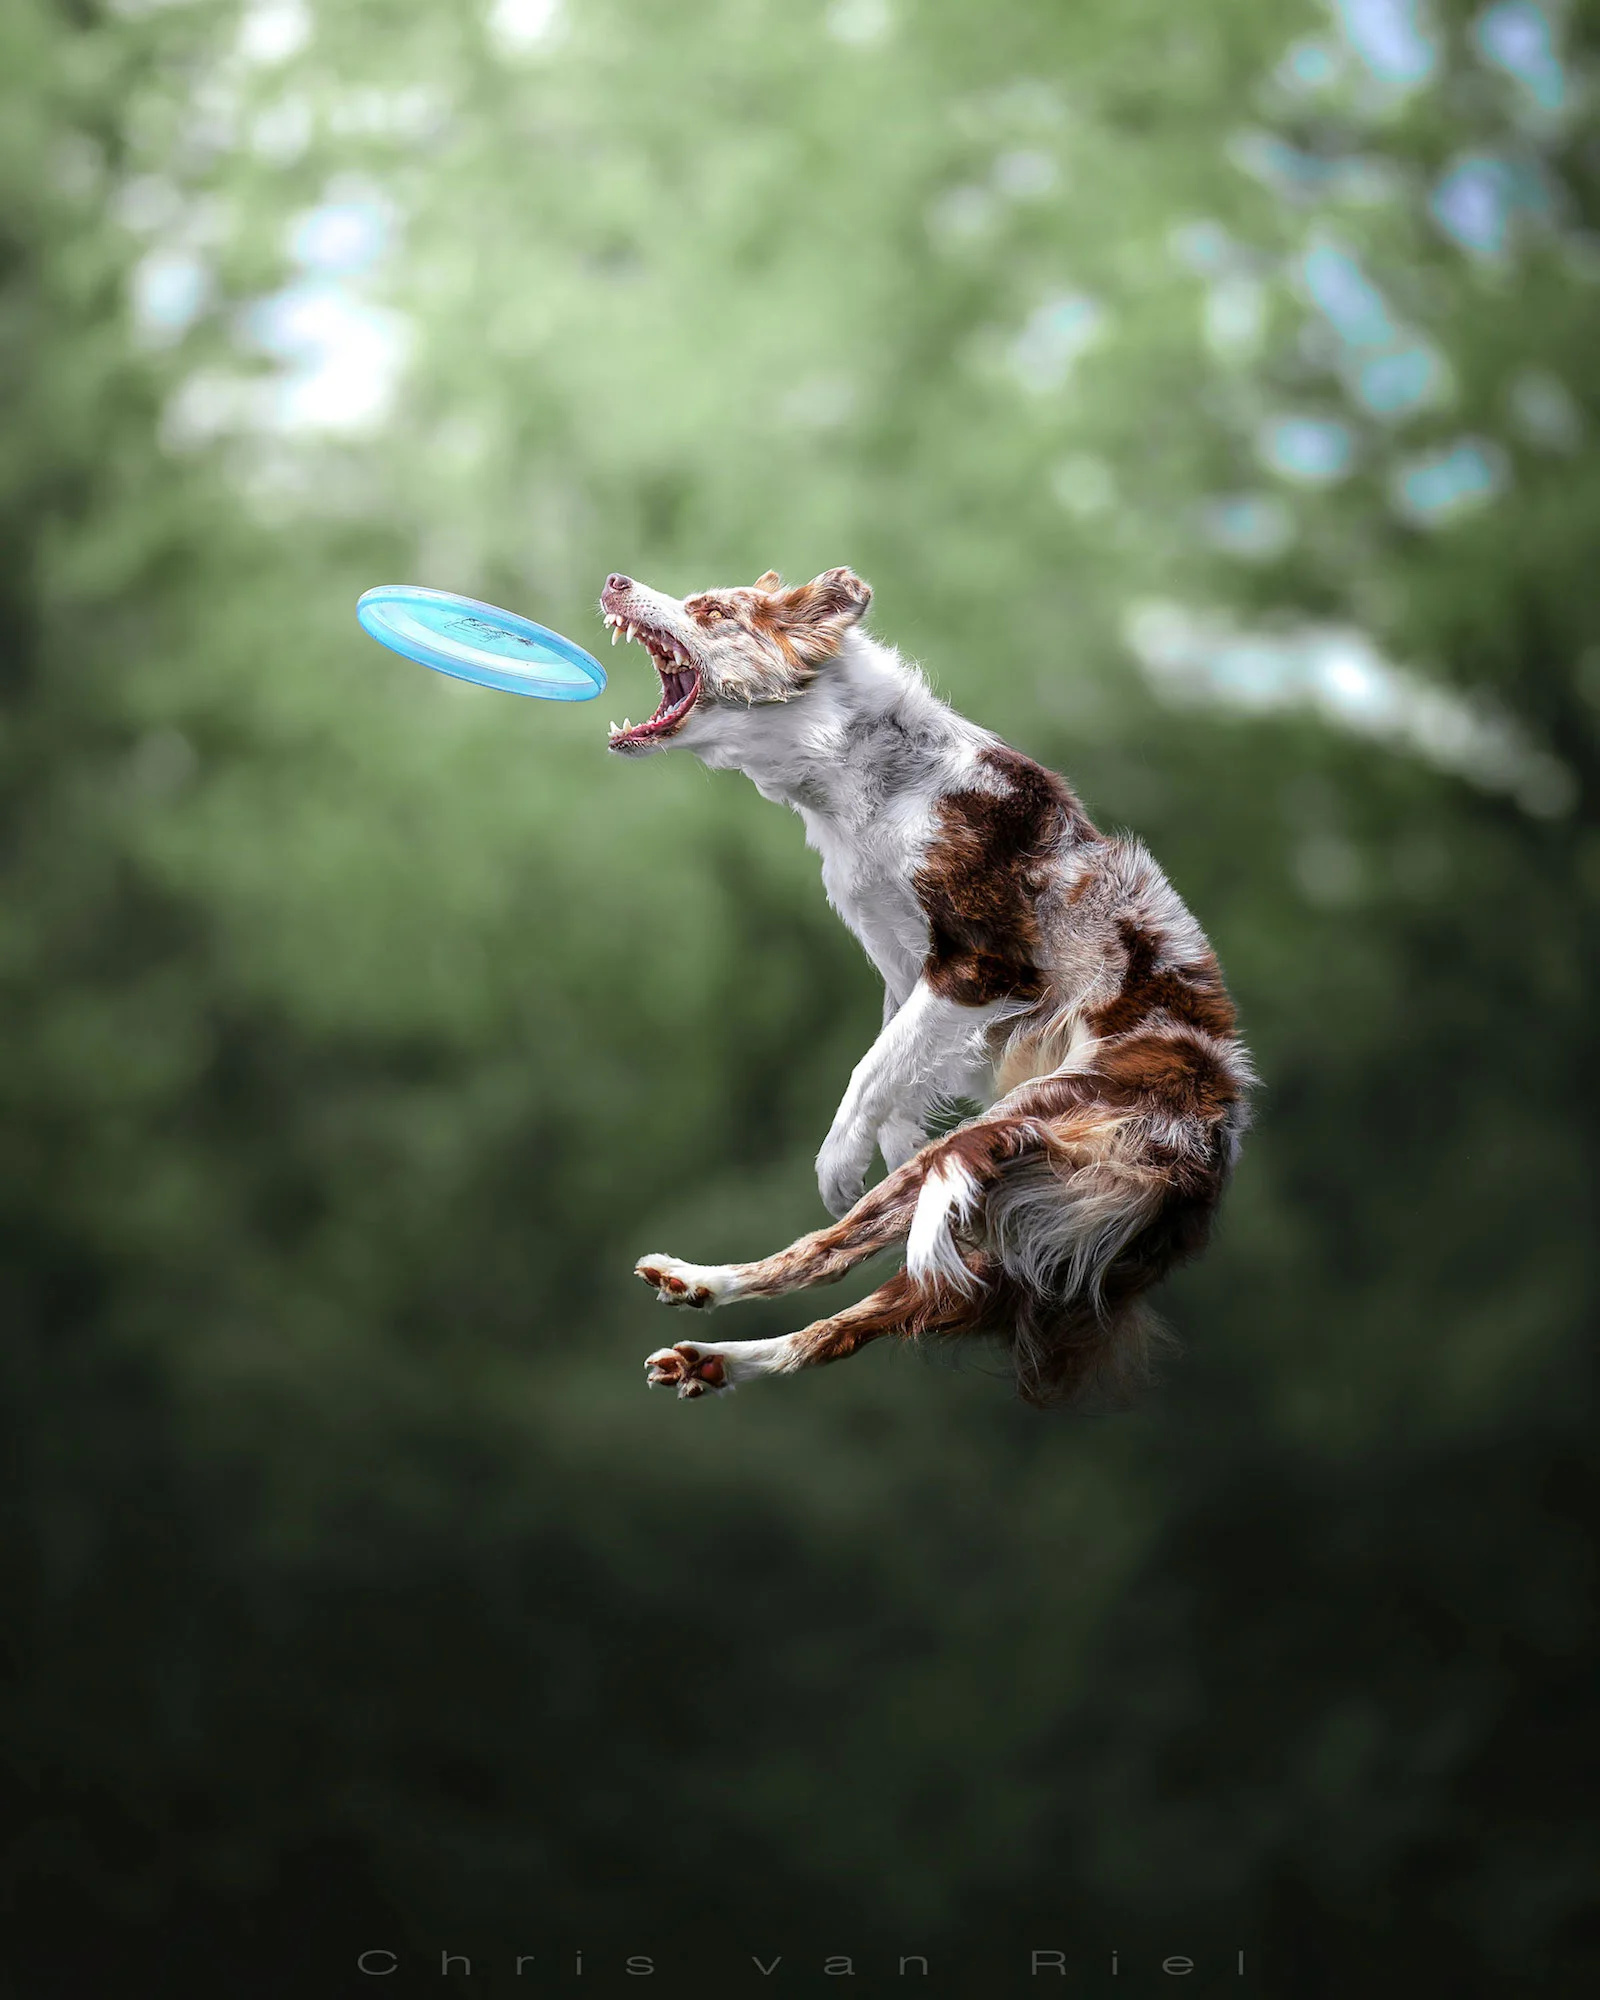 Flying Disc Sports: Disc Dog Sport, Dog Training, Fast Catching, Frisby for Pets. 1600x2000 HD Wallpaper.